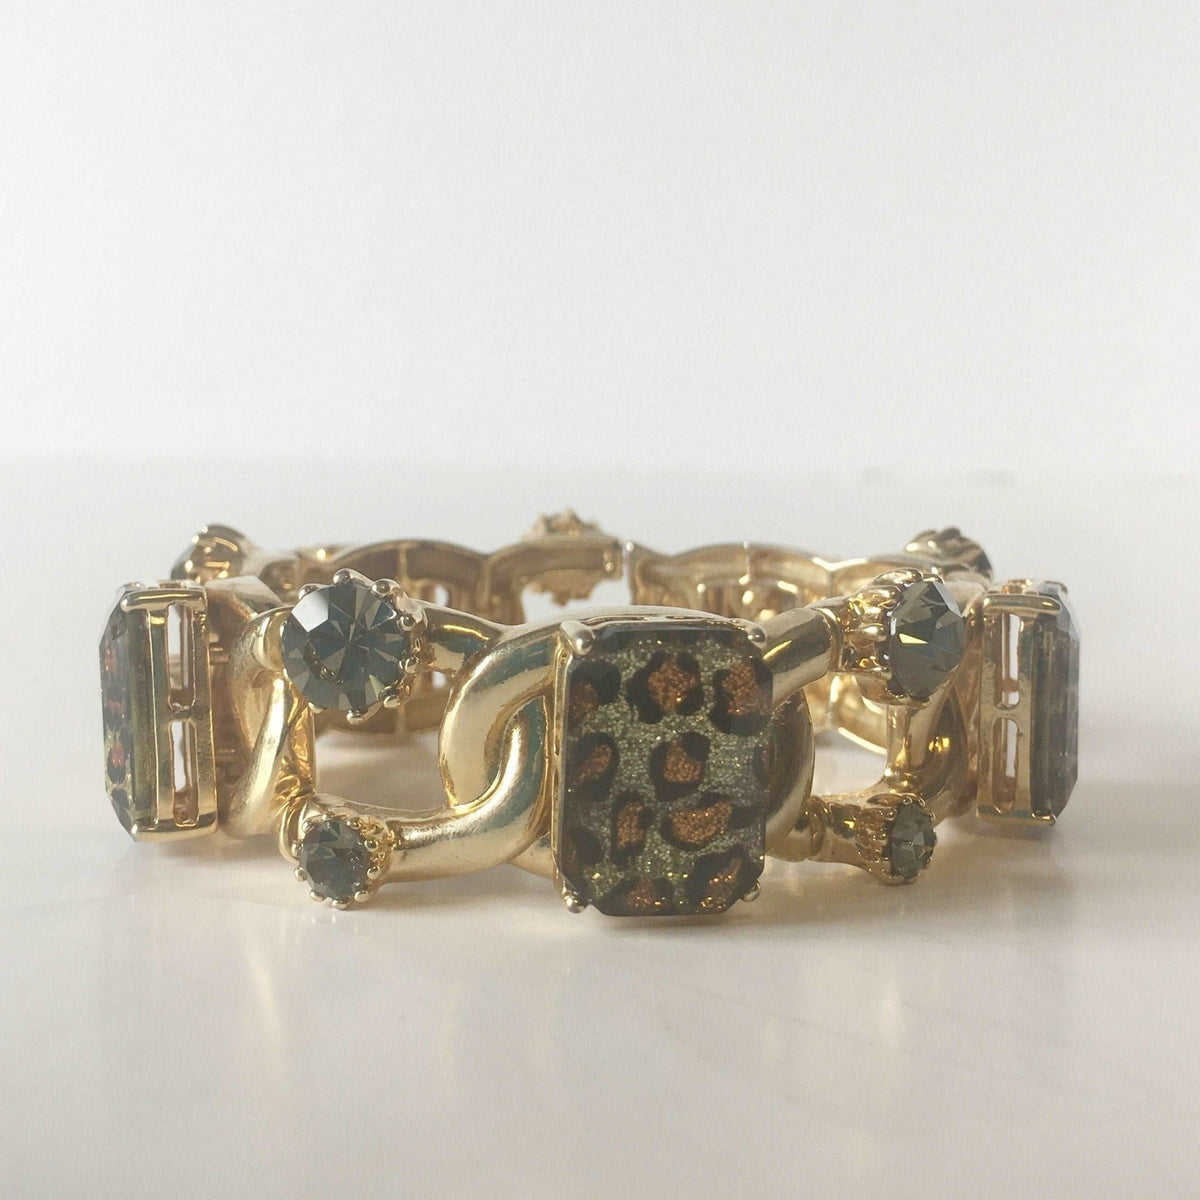 Betsey Johnson Cheetah Print Bracelet - A Contemporary Statement in Fashion Jewelry